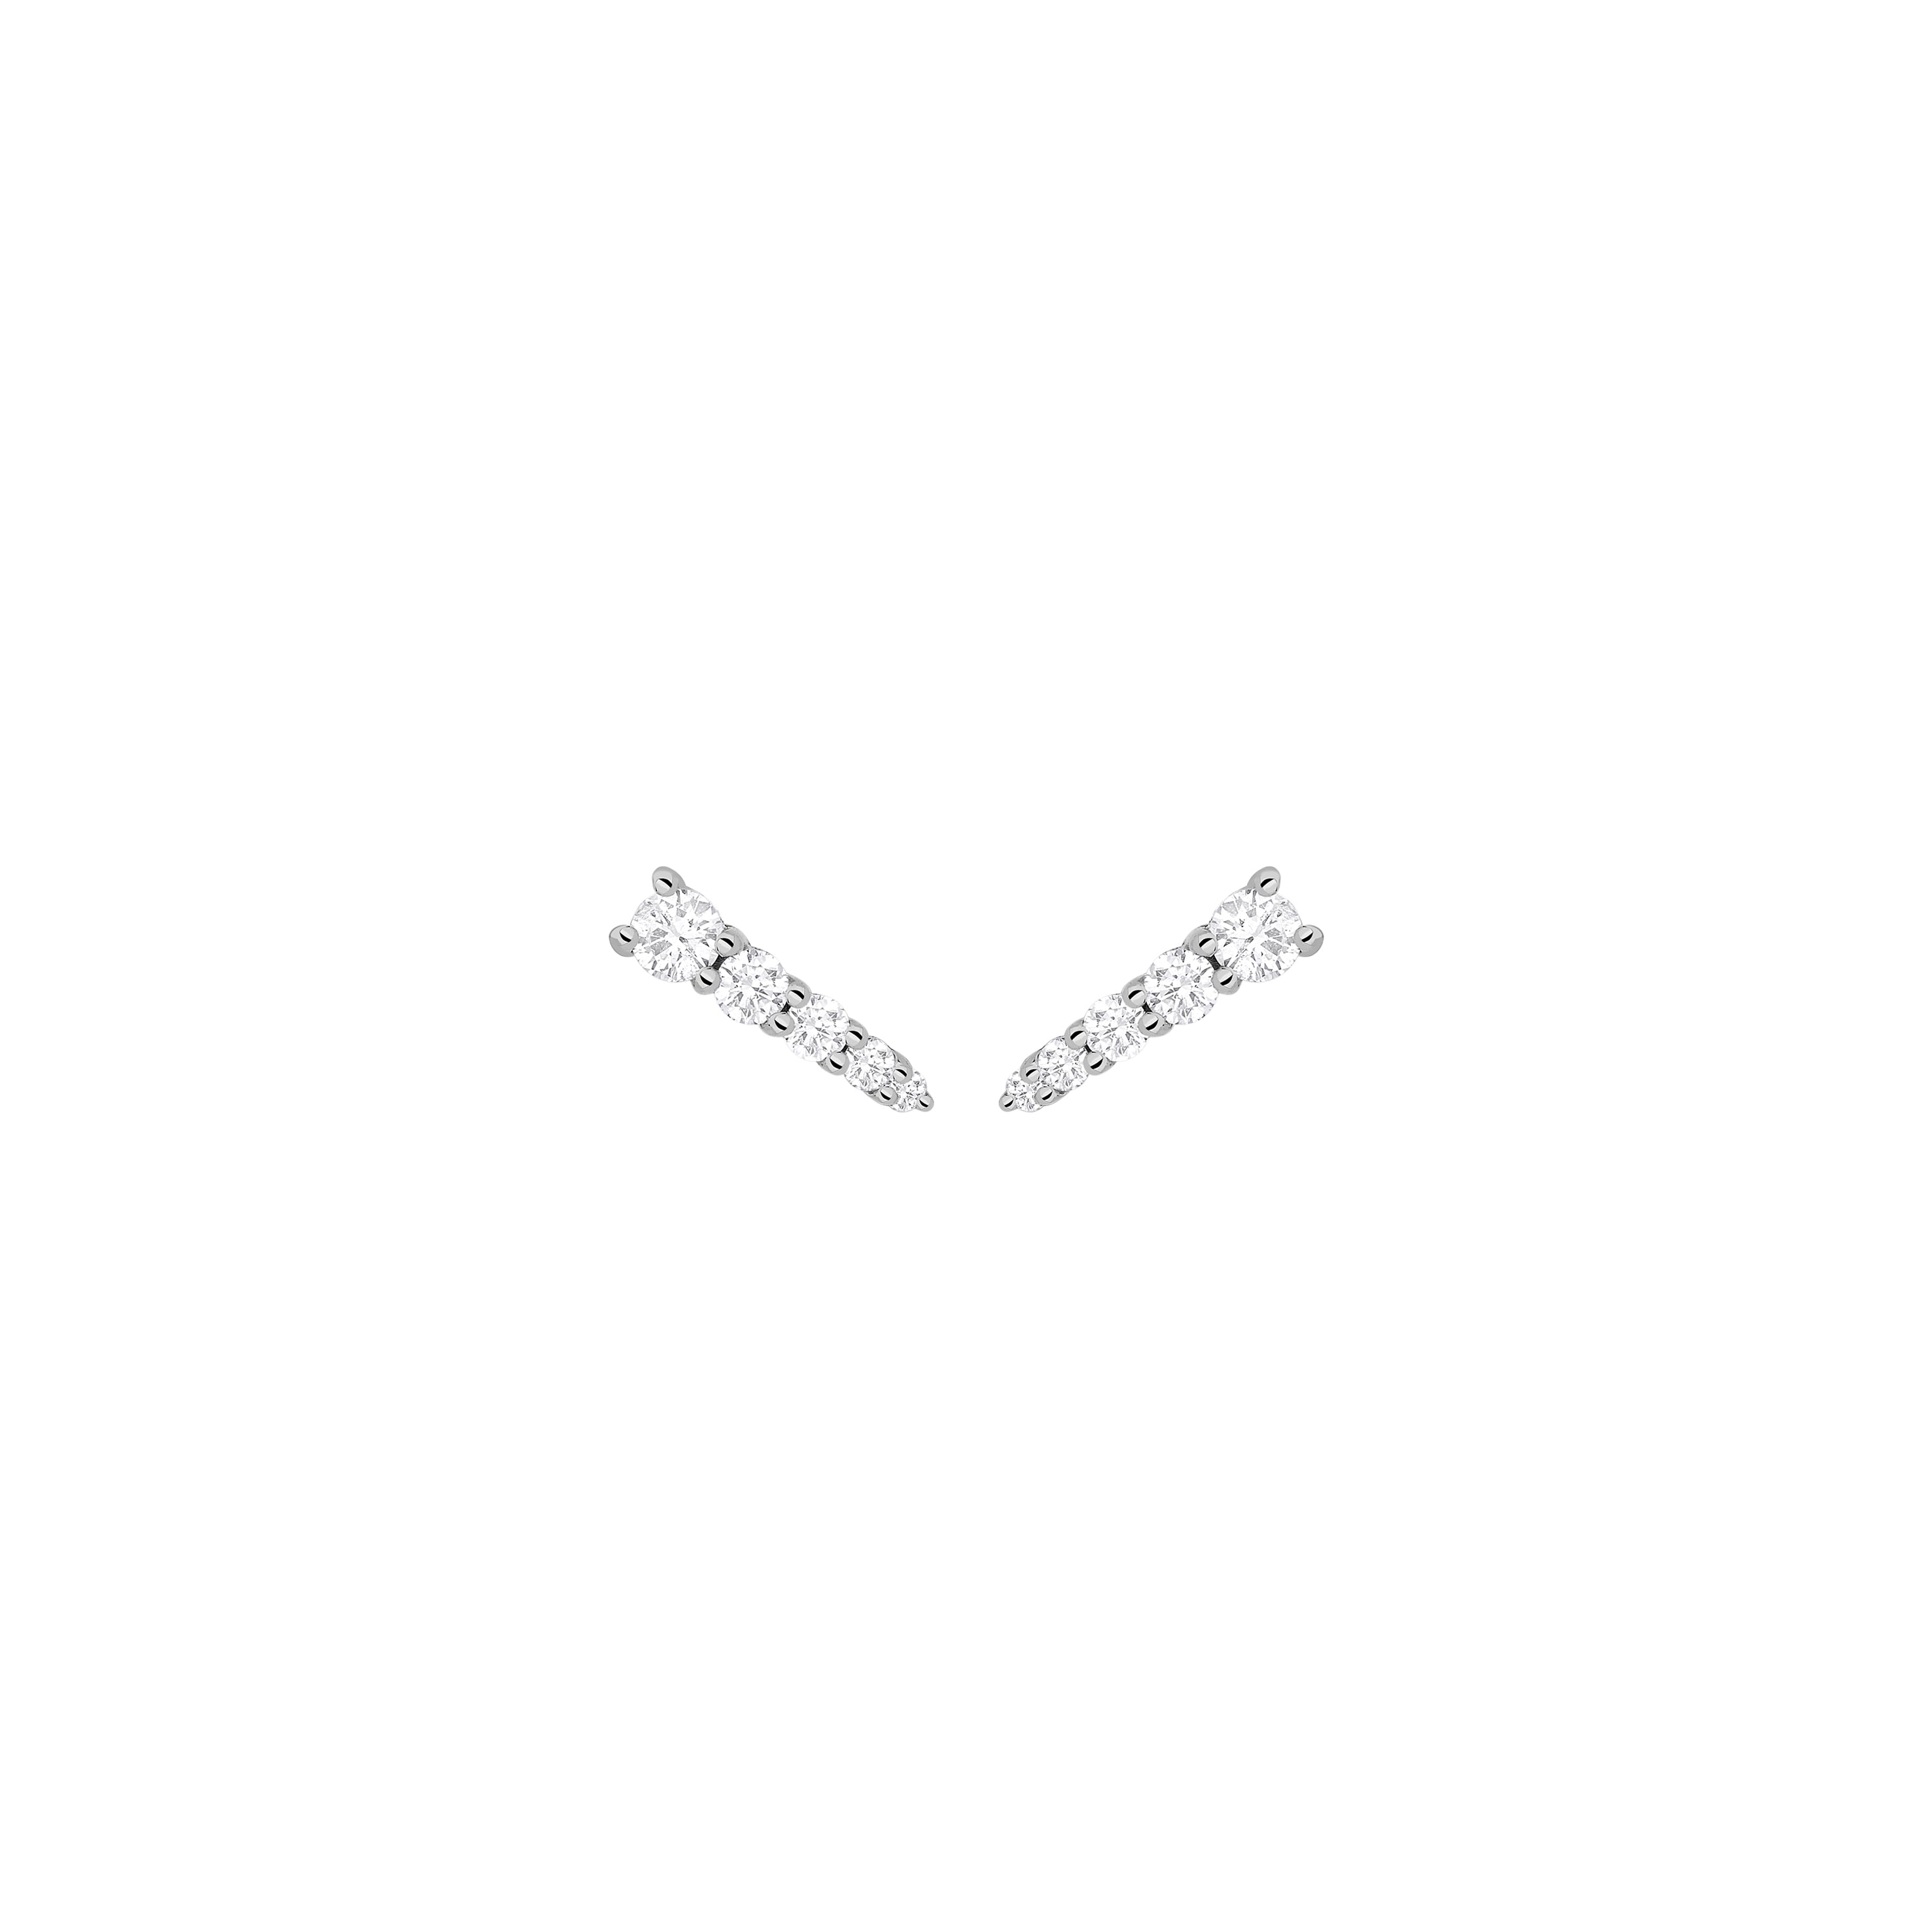 SMALL ROCK STAR COMET EARRING IN 18K WHITE GOLD WITH DIAMOND